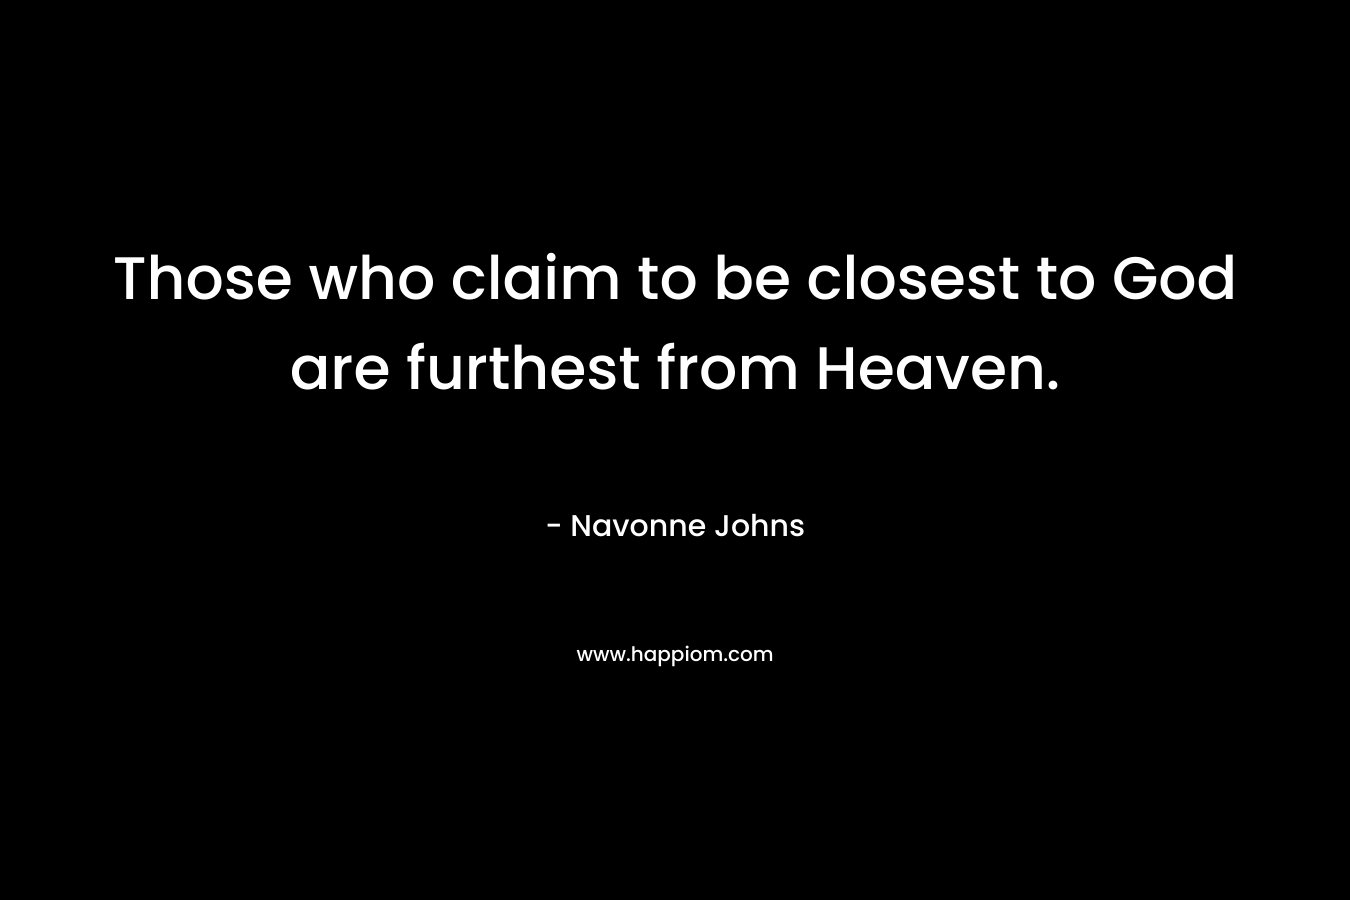 Those who claim to be closest to God are furthest from Heaven. – Navonne Johns